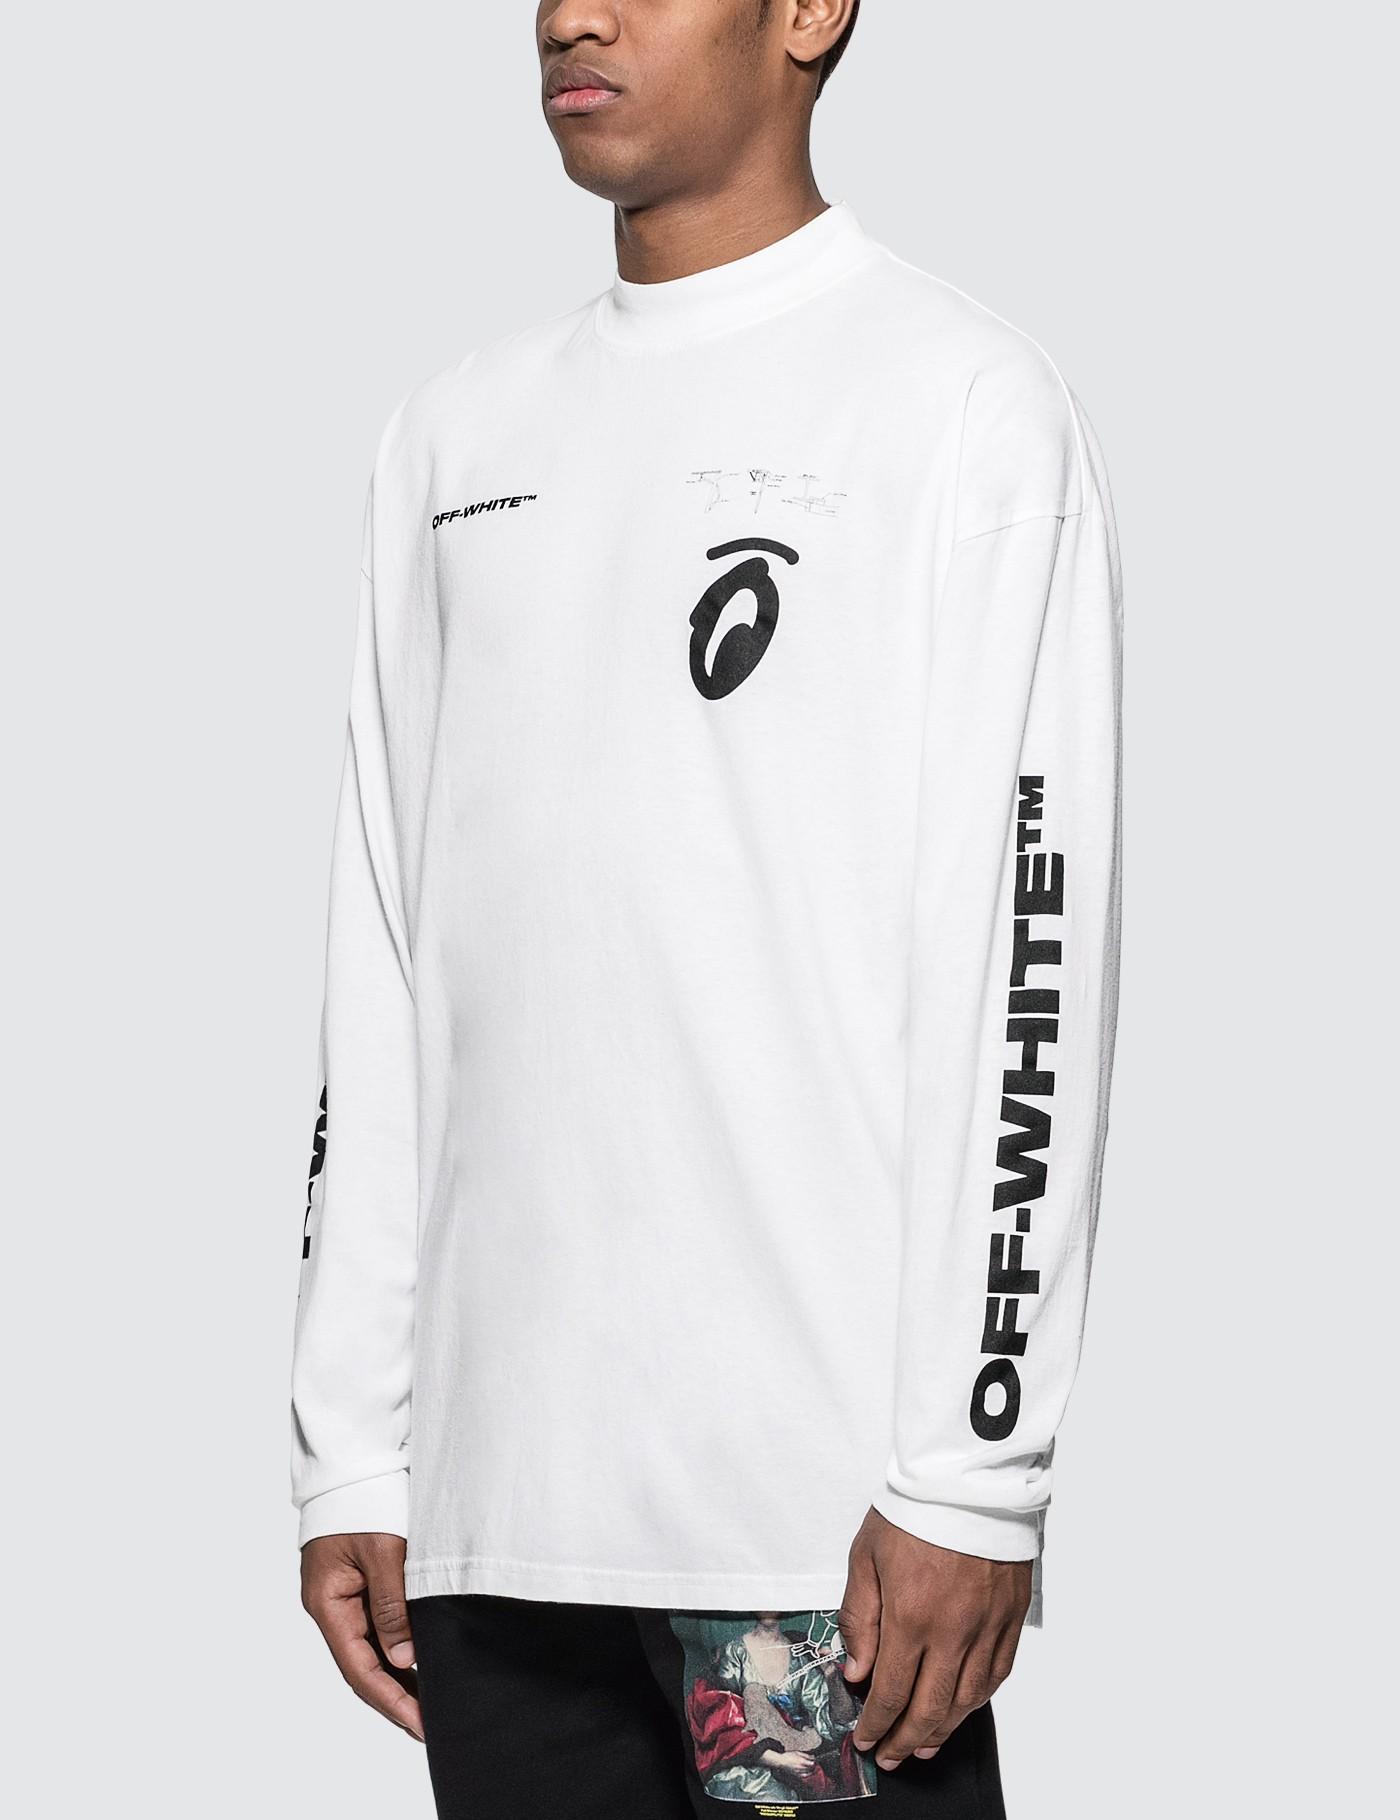 Off White Splitted Arrows Tee Cheap Sale, 53% OFF 